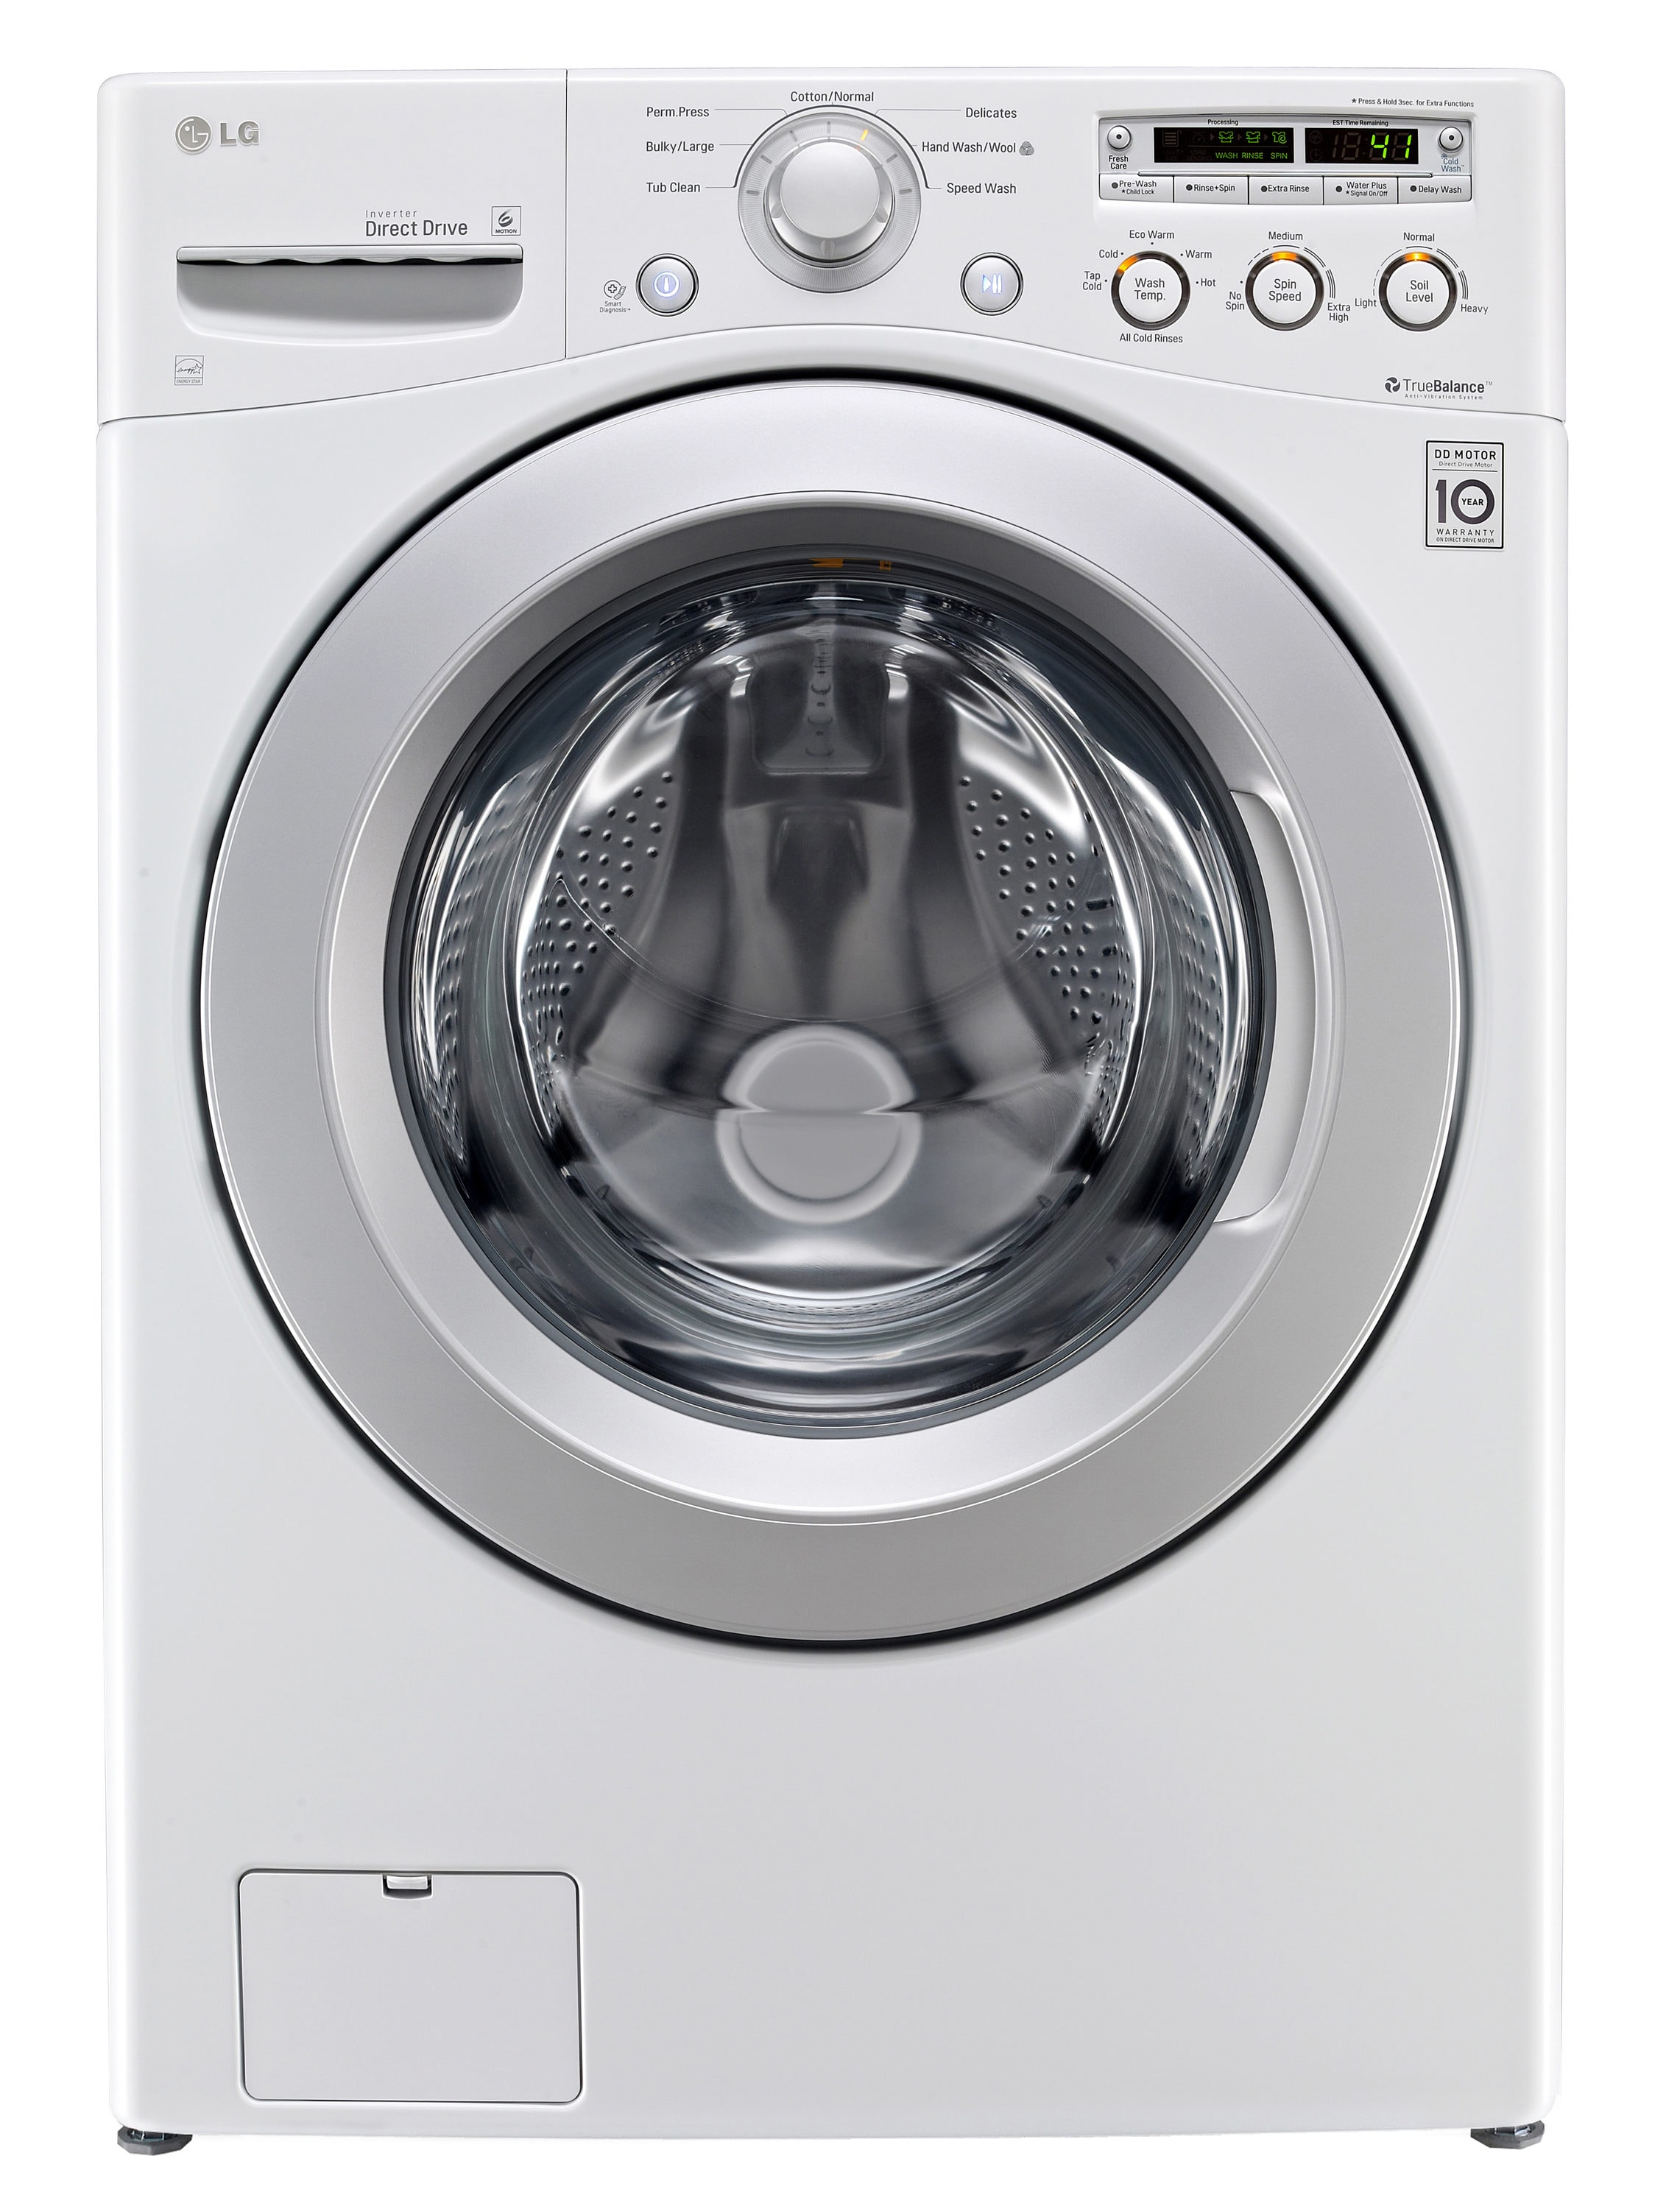 LG WM3050CW: Large Front Load Washer with ColdWash Technology